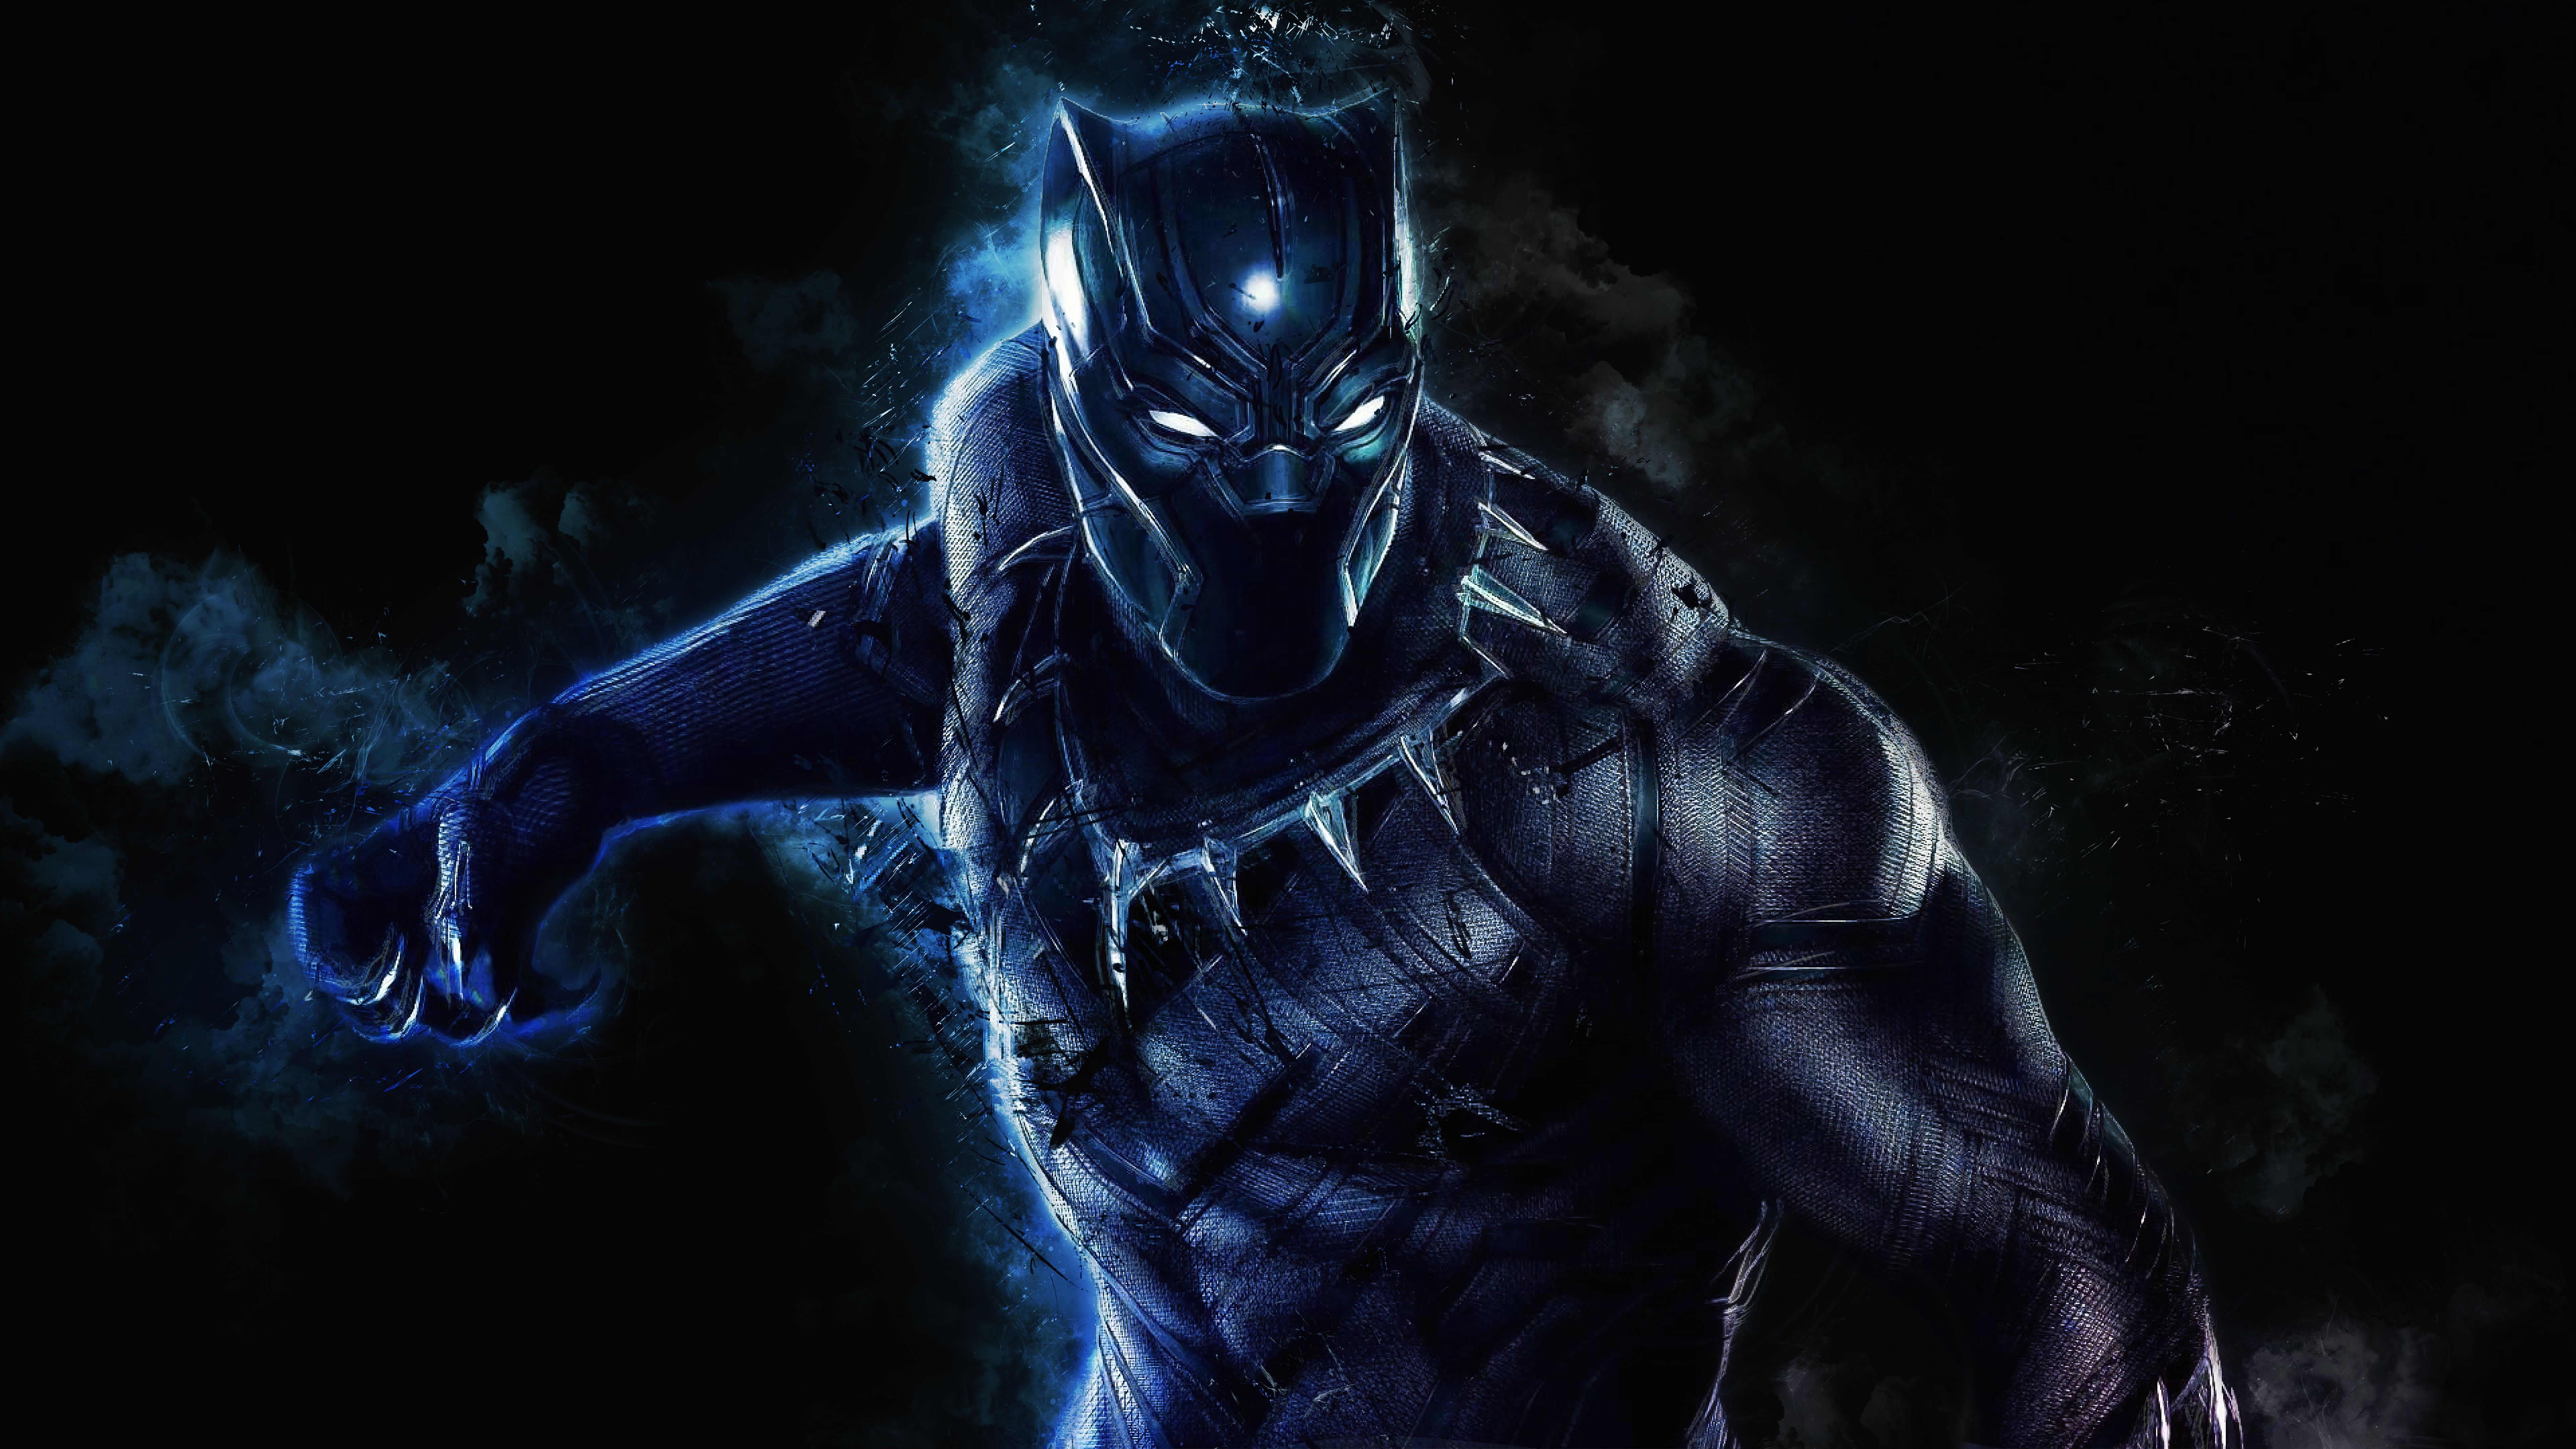 7680x4320 Free Black Panther Chromebook Wallpaper Ready For Download